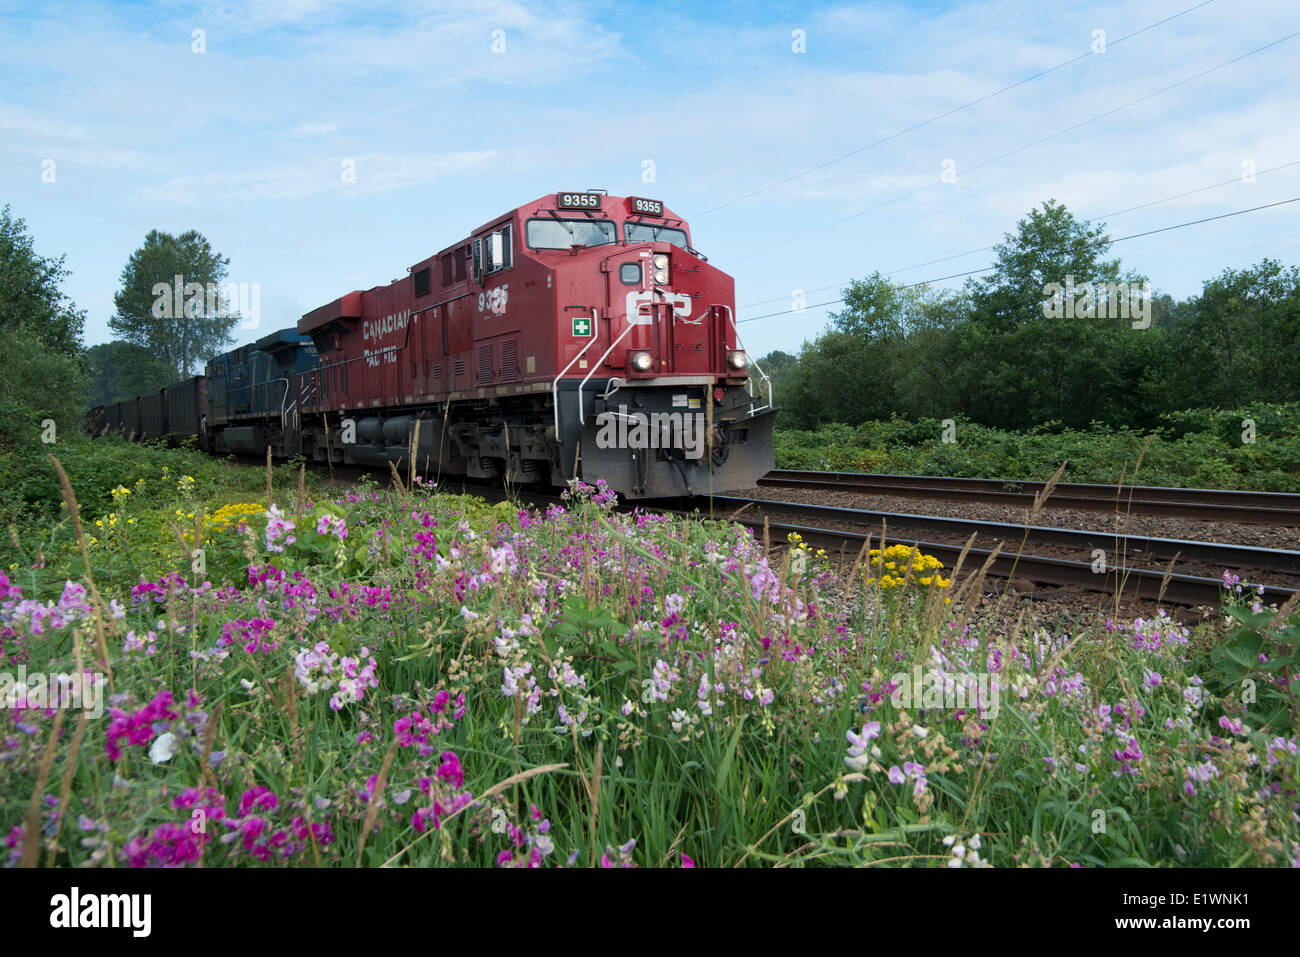 A CP (Canadian Pacific) train pulls empty coal cars through Langley, BC, Canada. Stock Photo